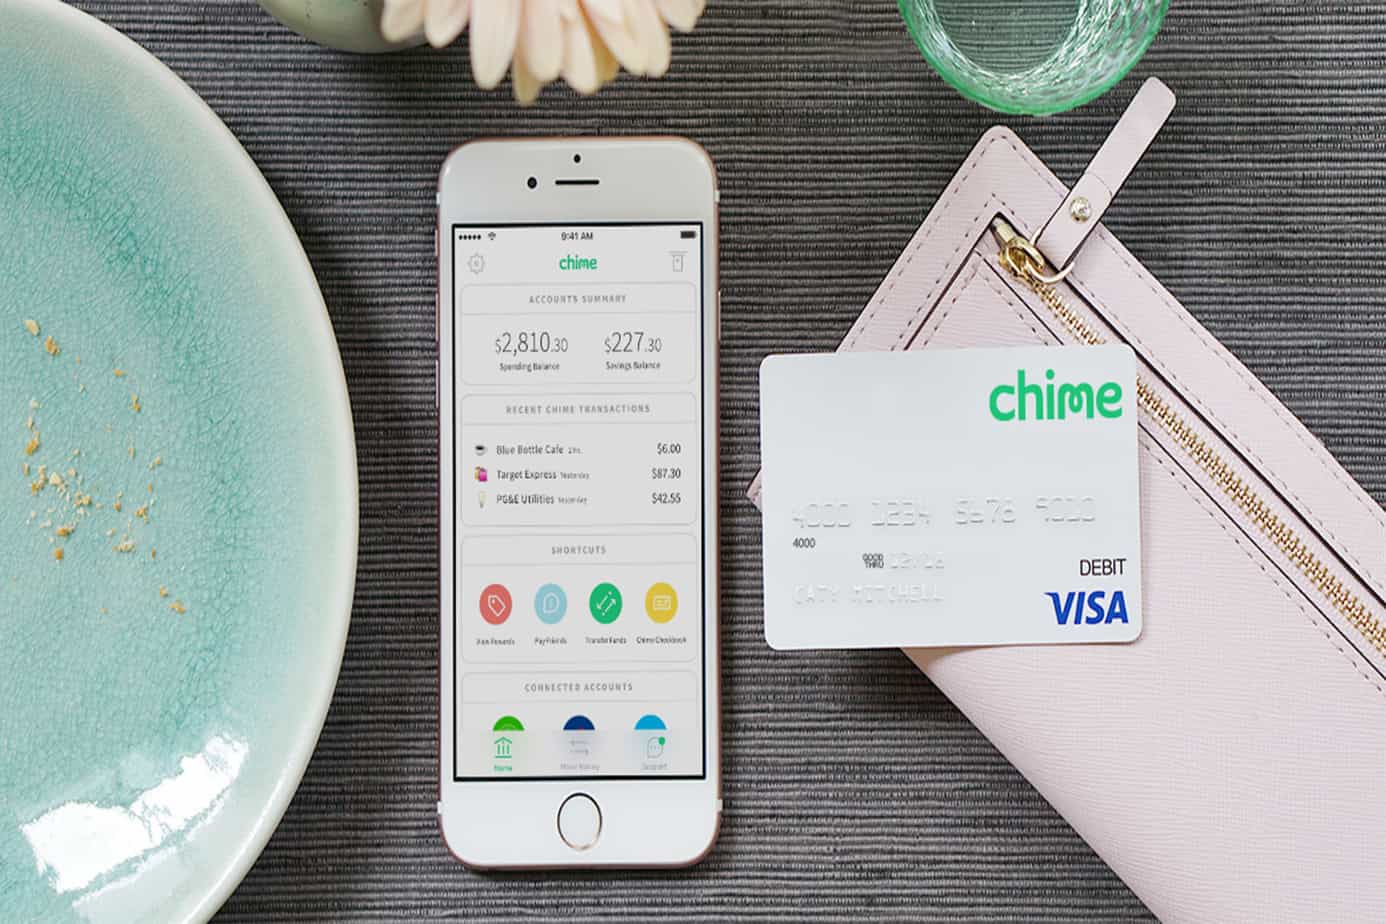 How Do You Order Chime Card